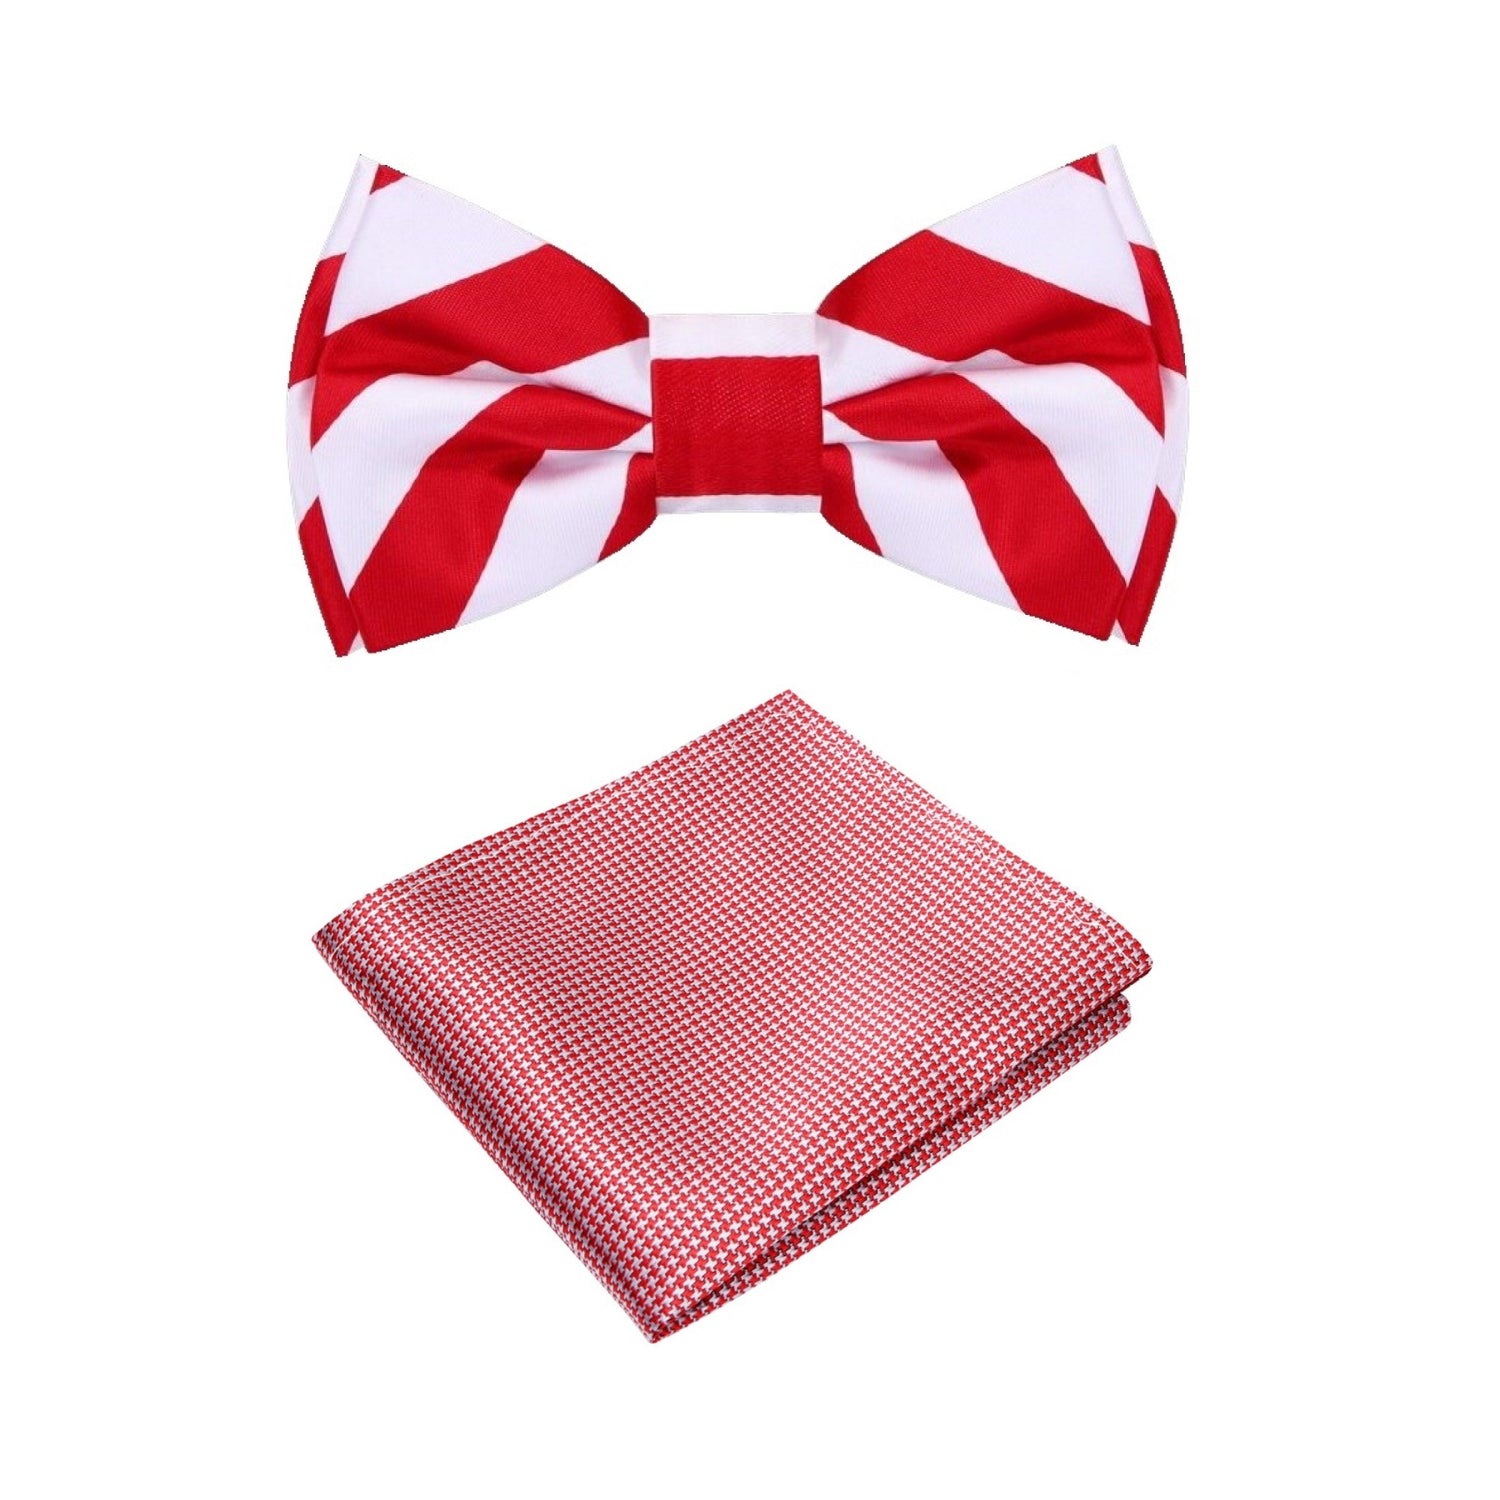 Red, White Block Stripe Bow Tie with Accenting Red Pocket Square